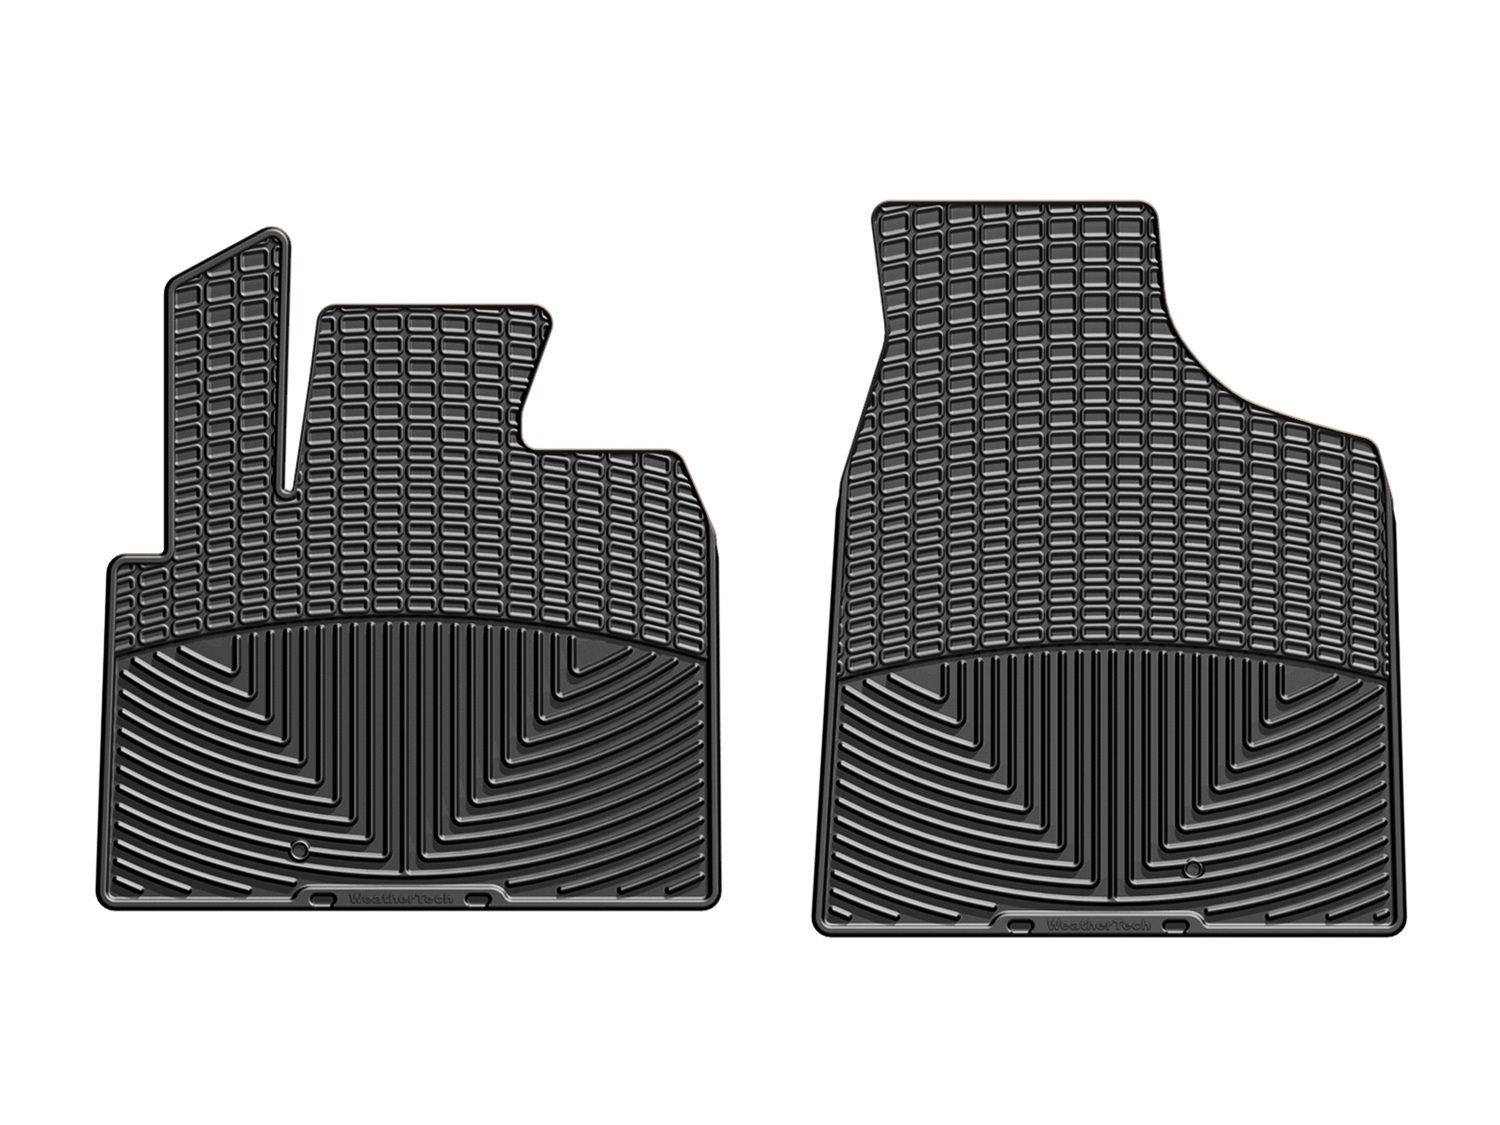 All-Weather Floor Mats for 2011-2017 Dodge Grand Caravan/Chrysler Town and Country